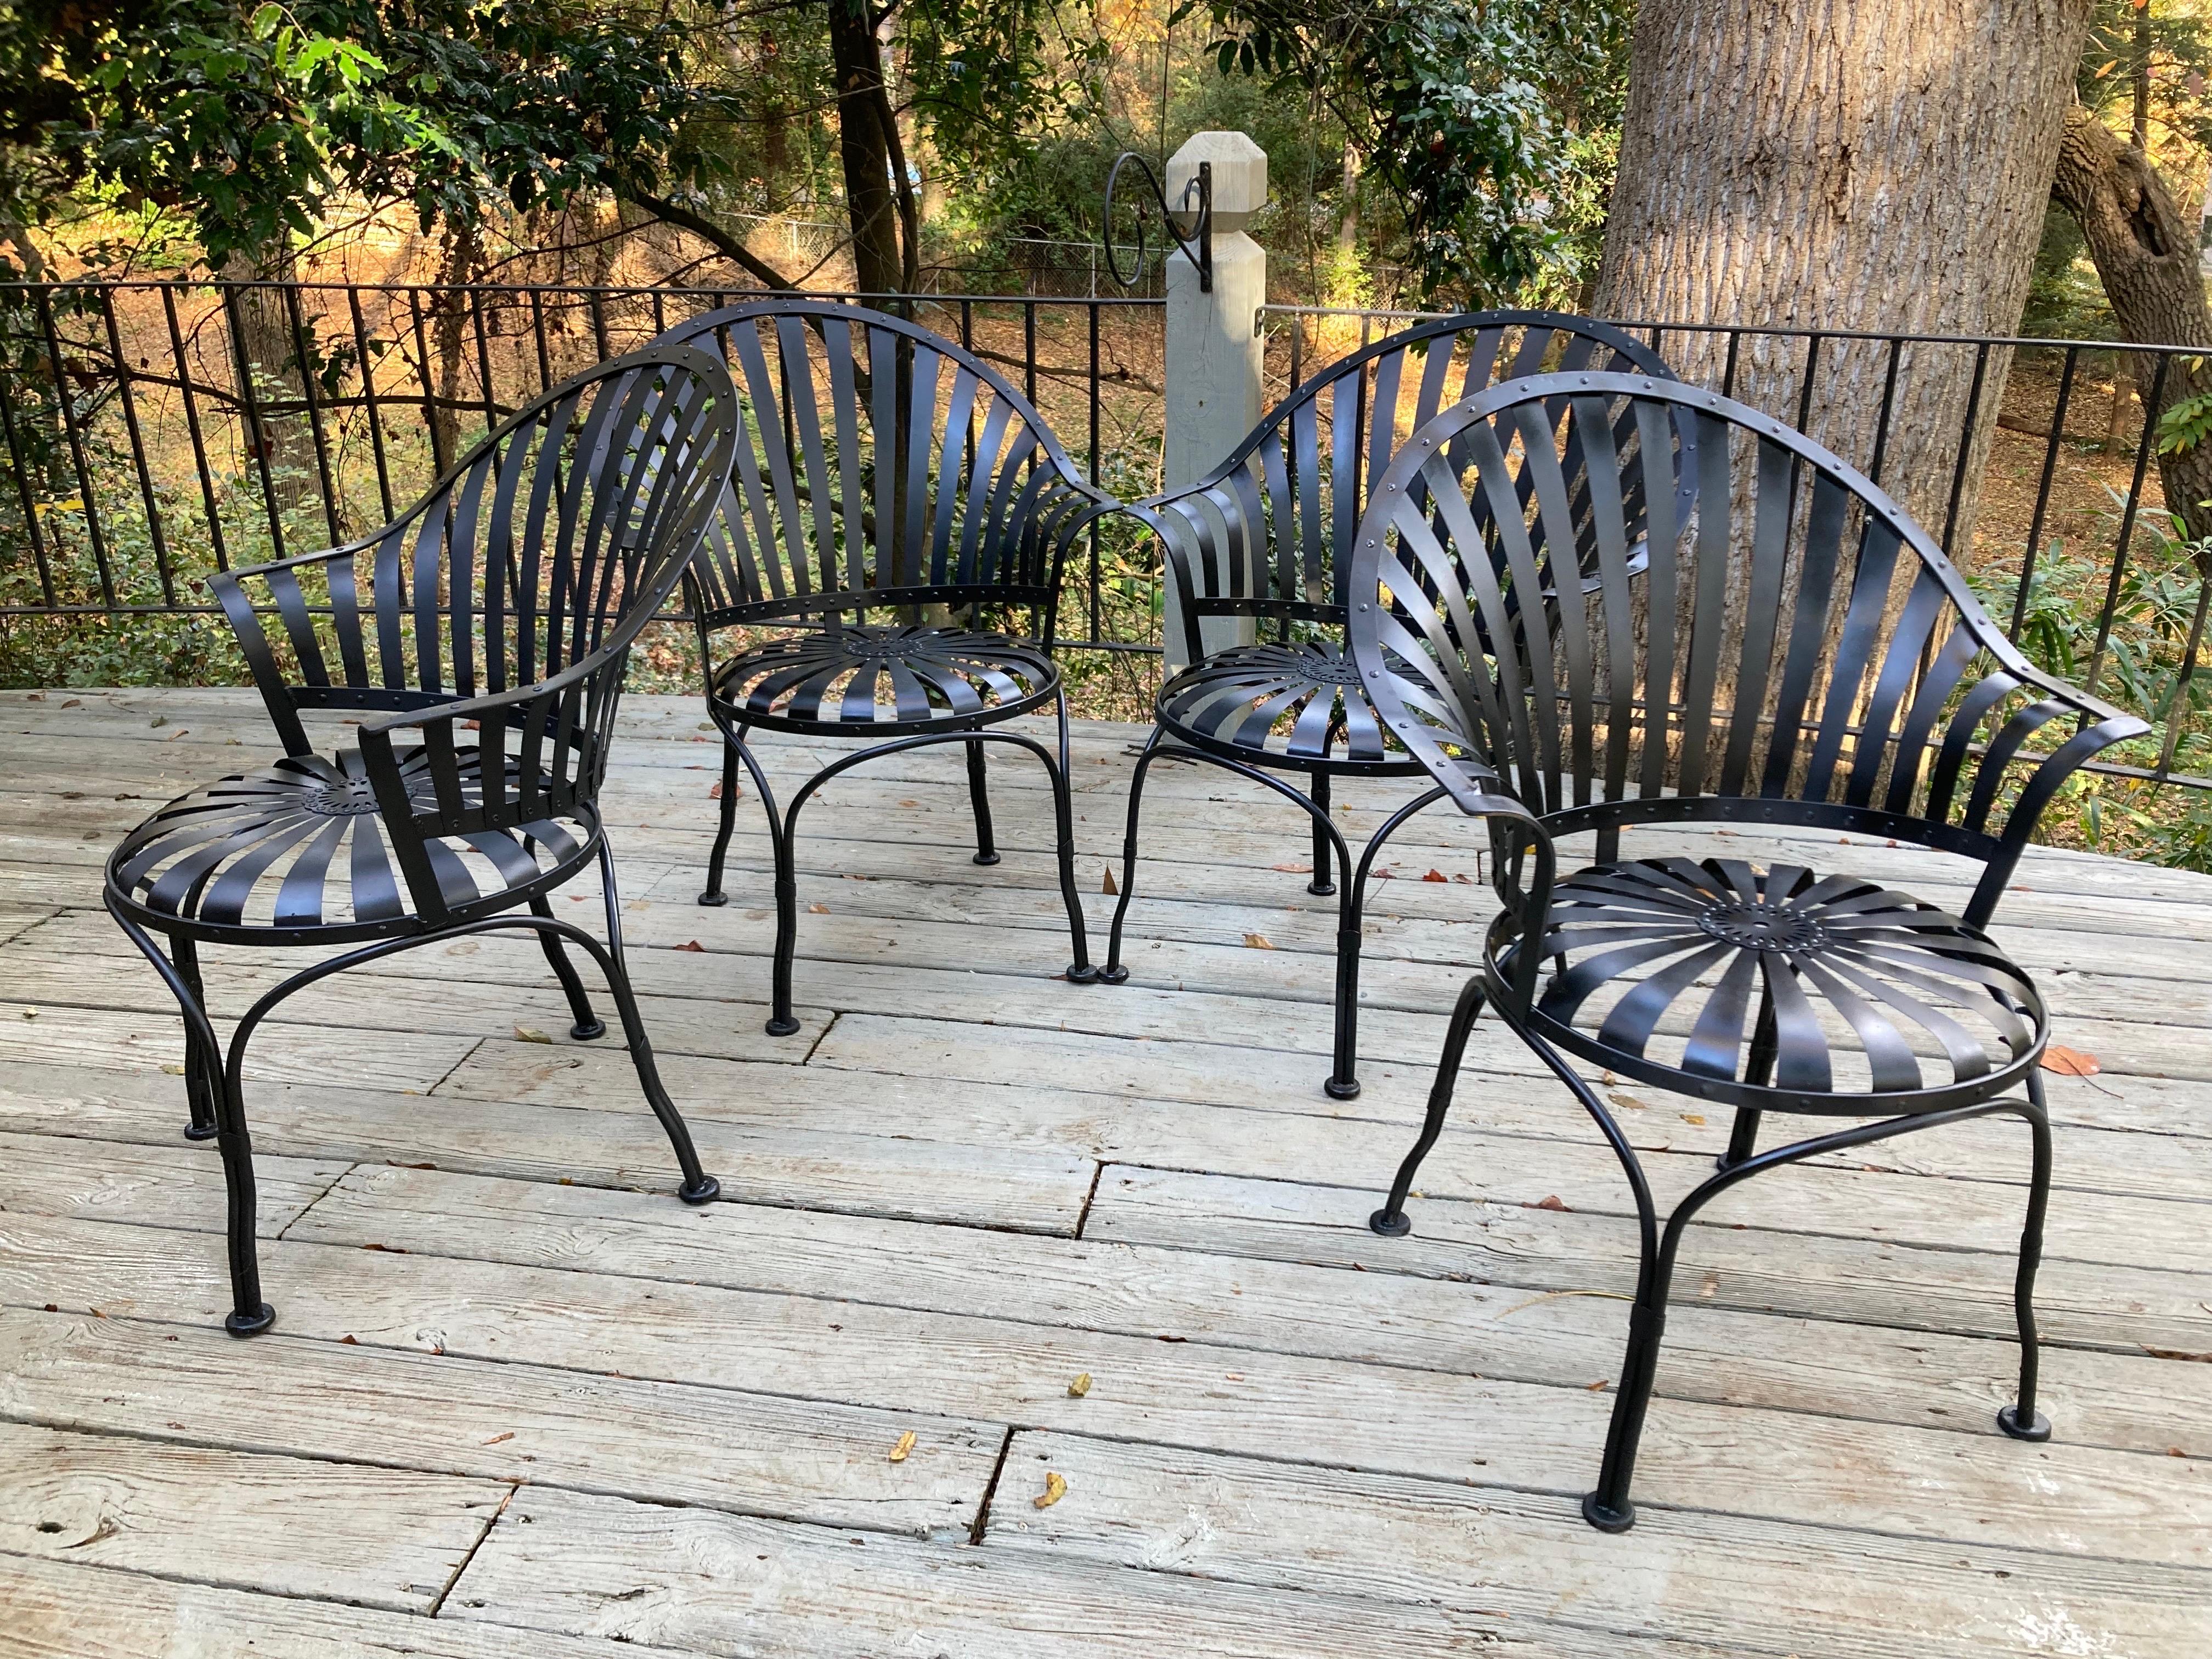 20th Century Francois Carre Fan Back Garden Chairs - set of 4